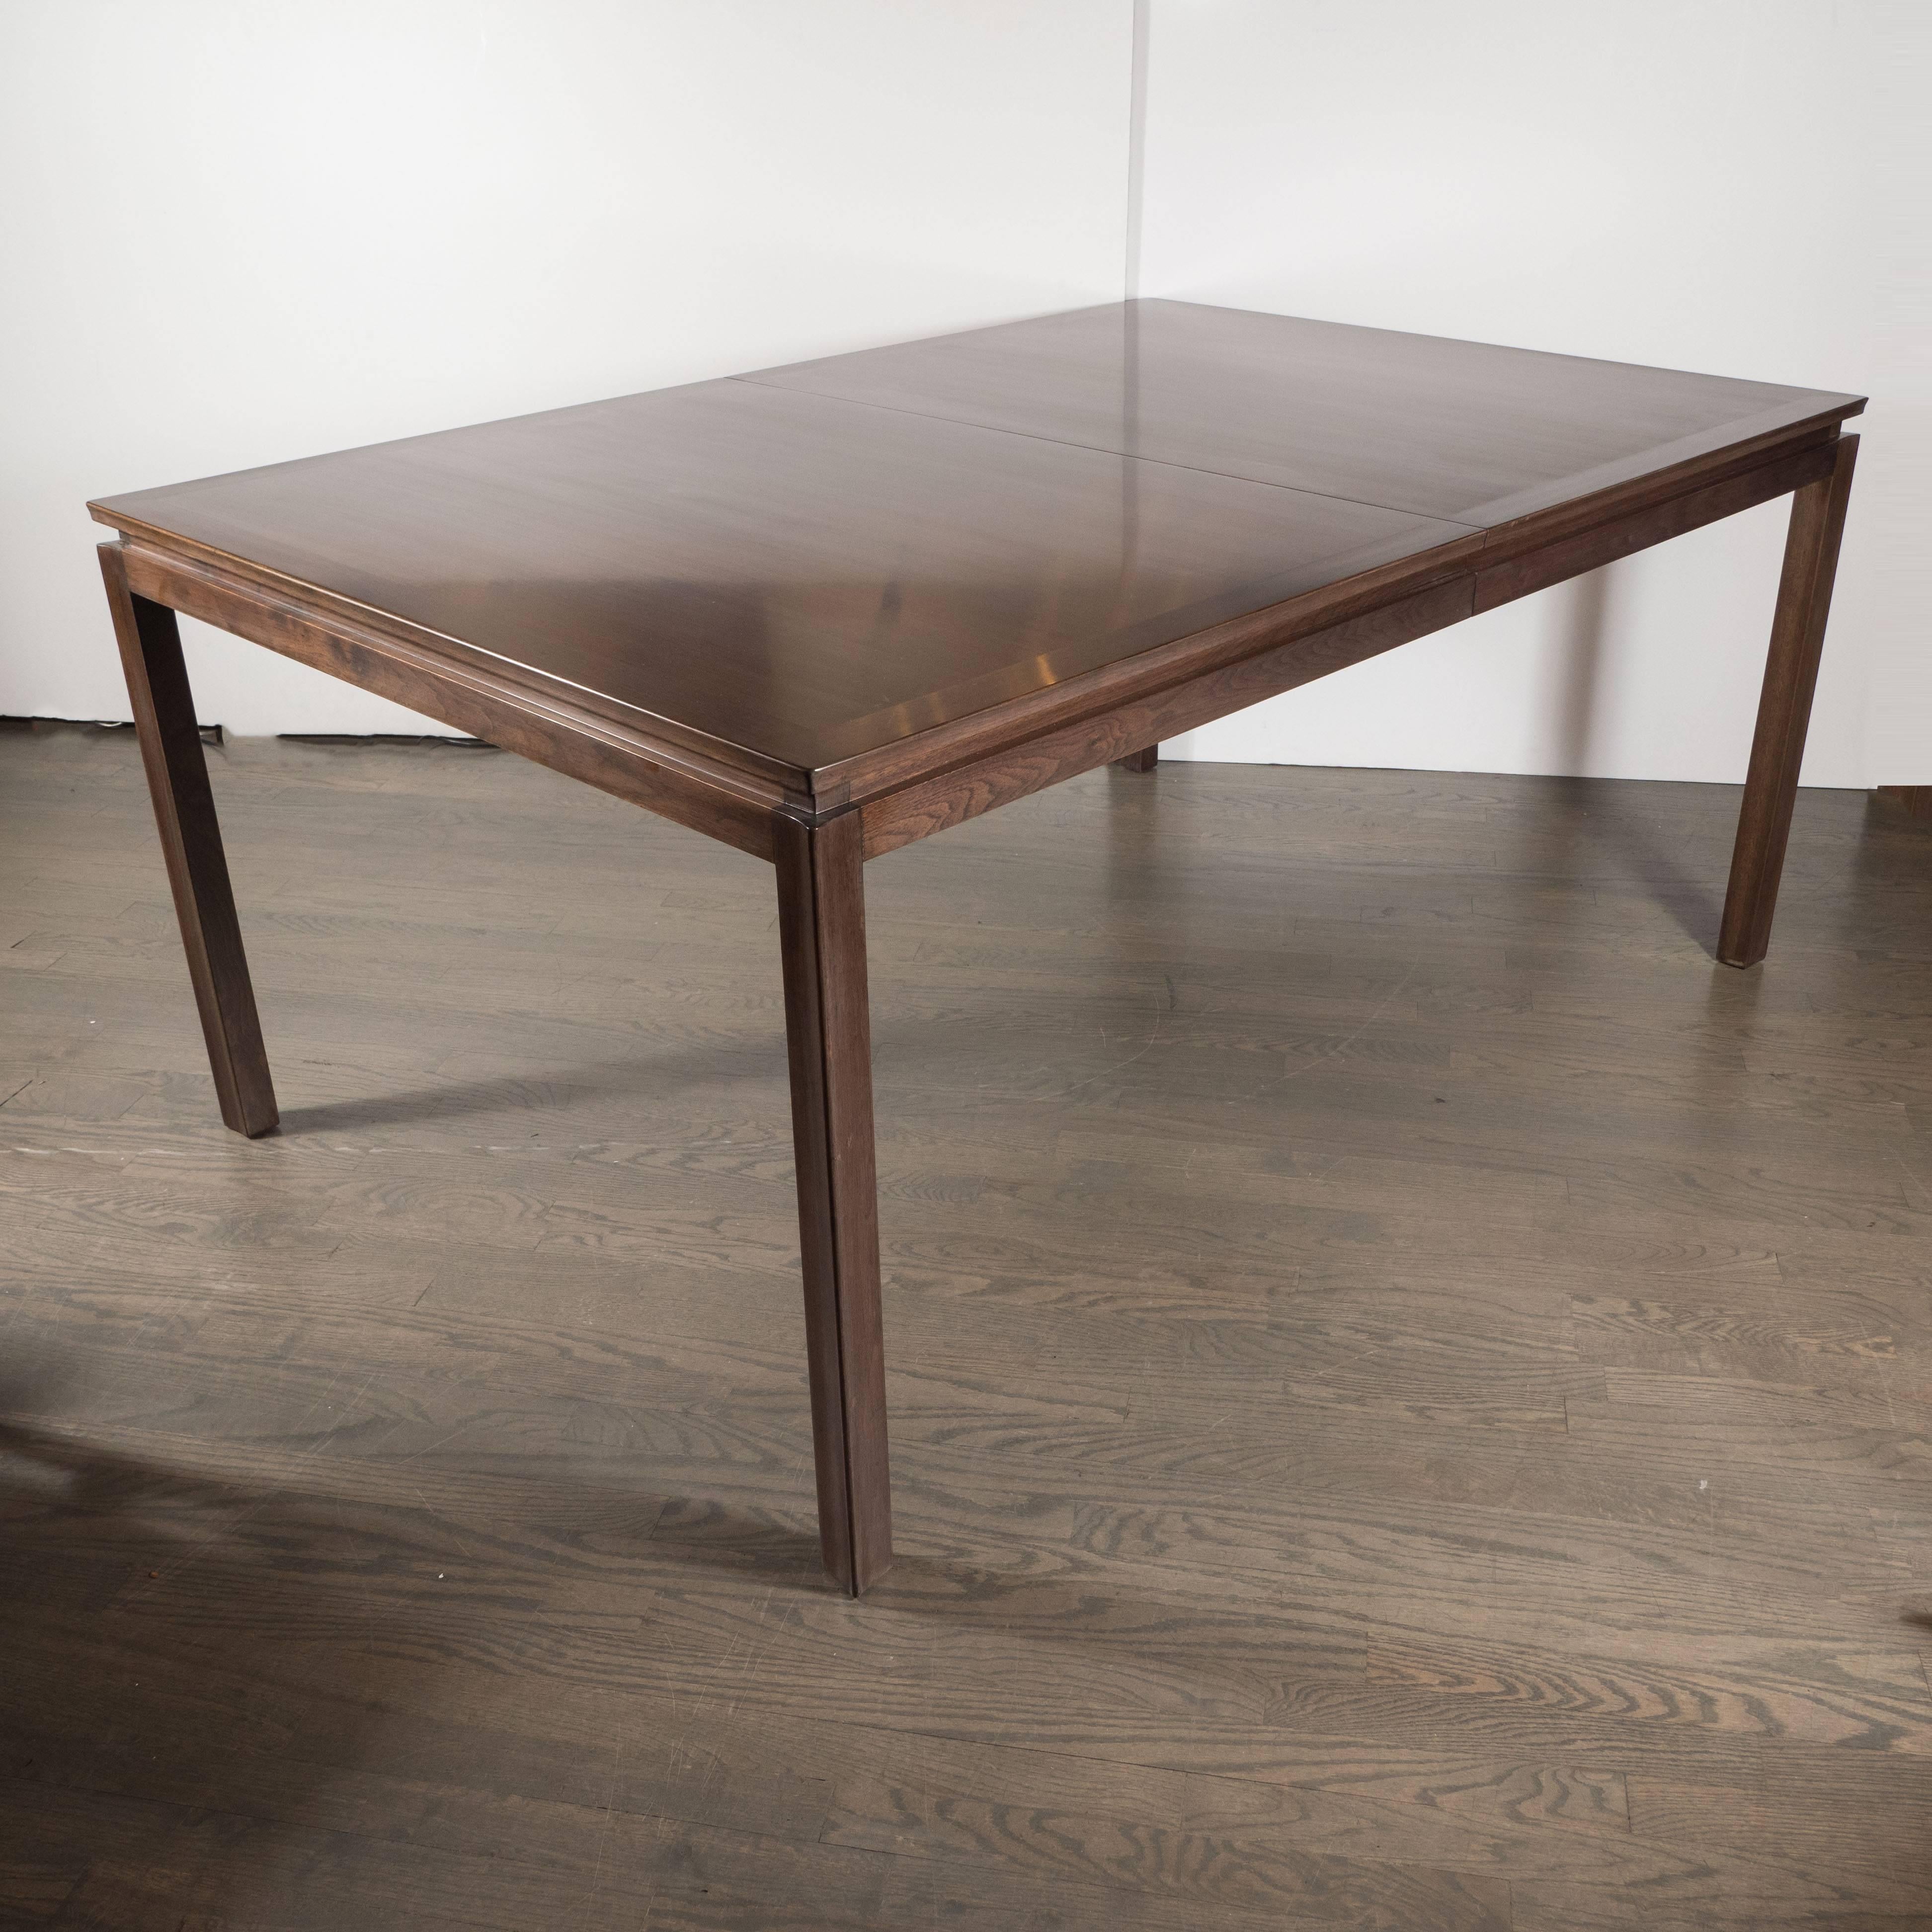 This handsome dining table was realized by Edward Wormley for Dunbar, where Wormley served as long-time director of design. Celebrated for his modern interpretations on Classic designs, this table embodies the timeless aesthetic for which he is